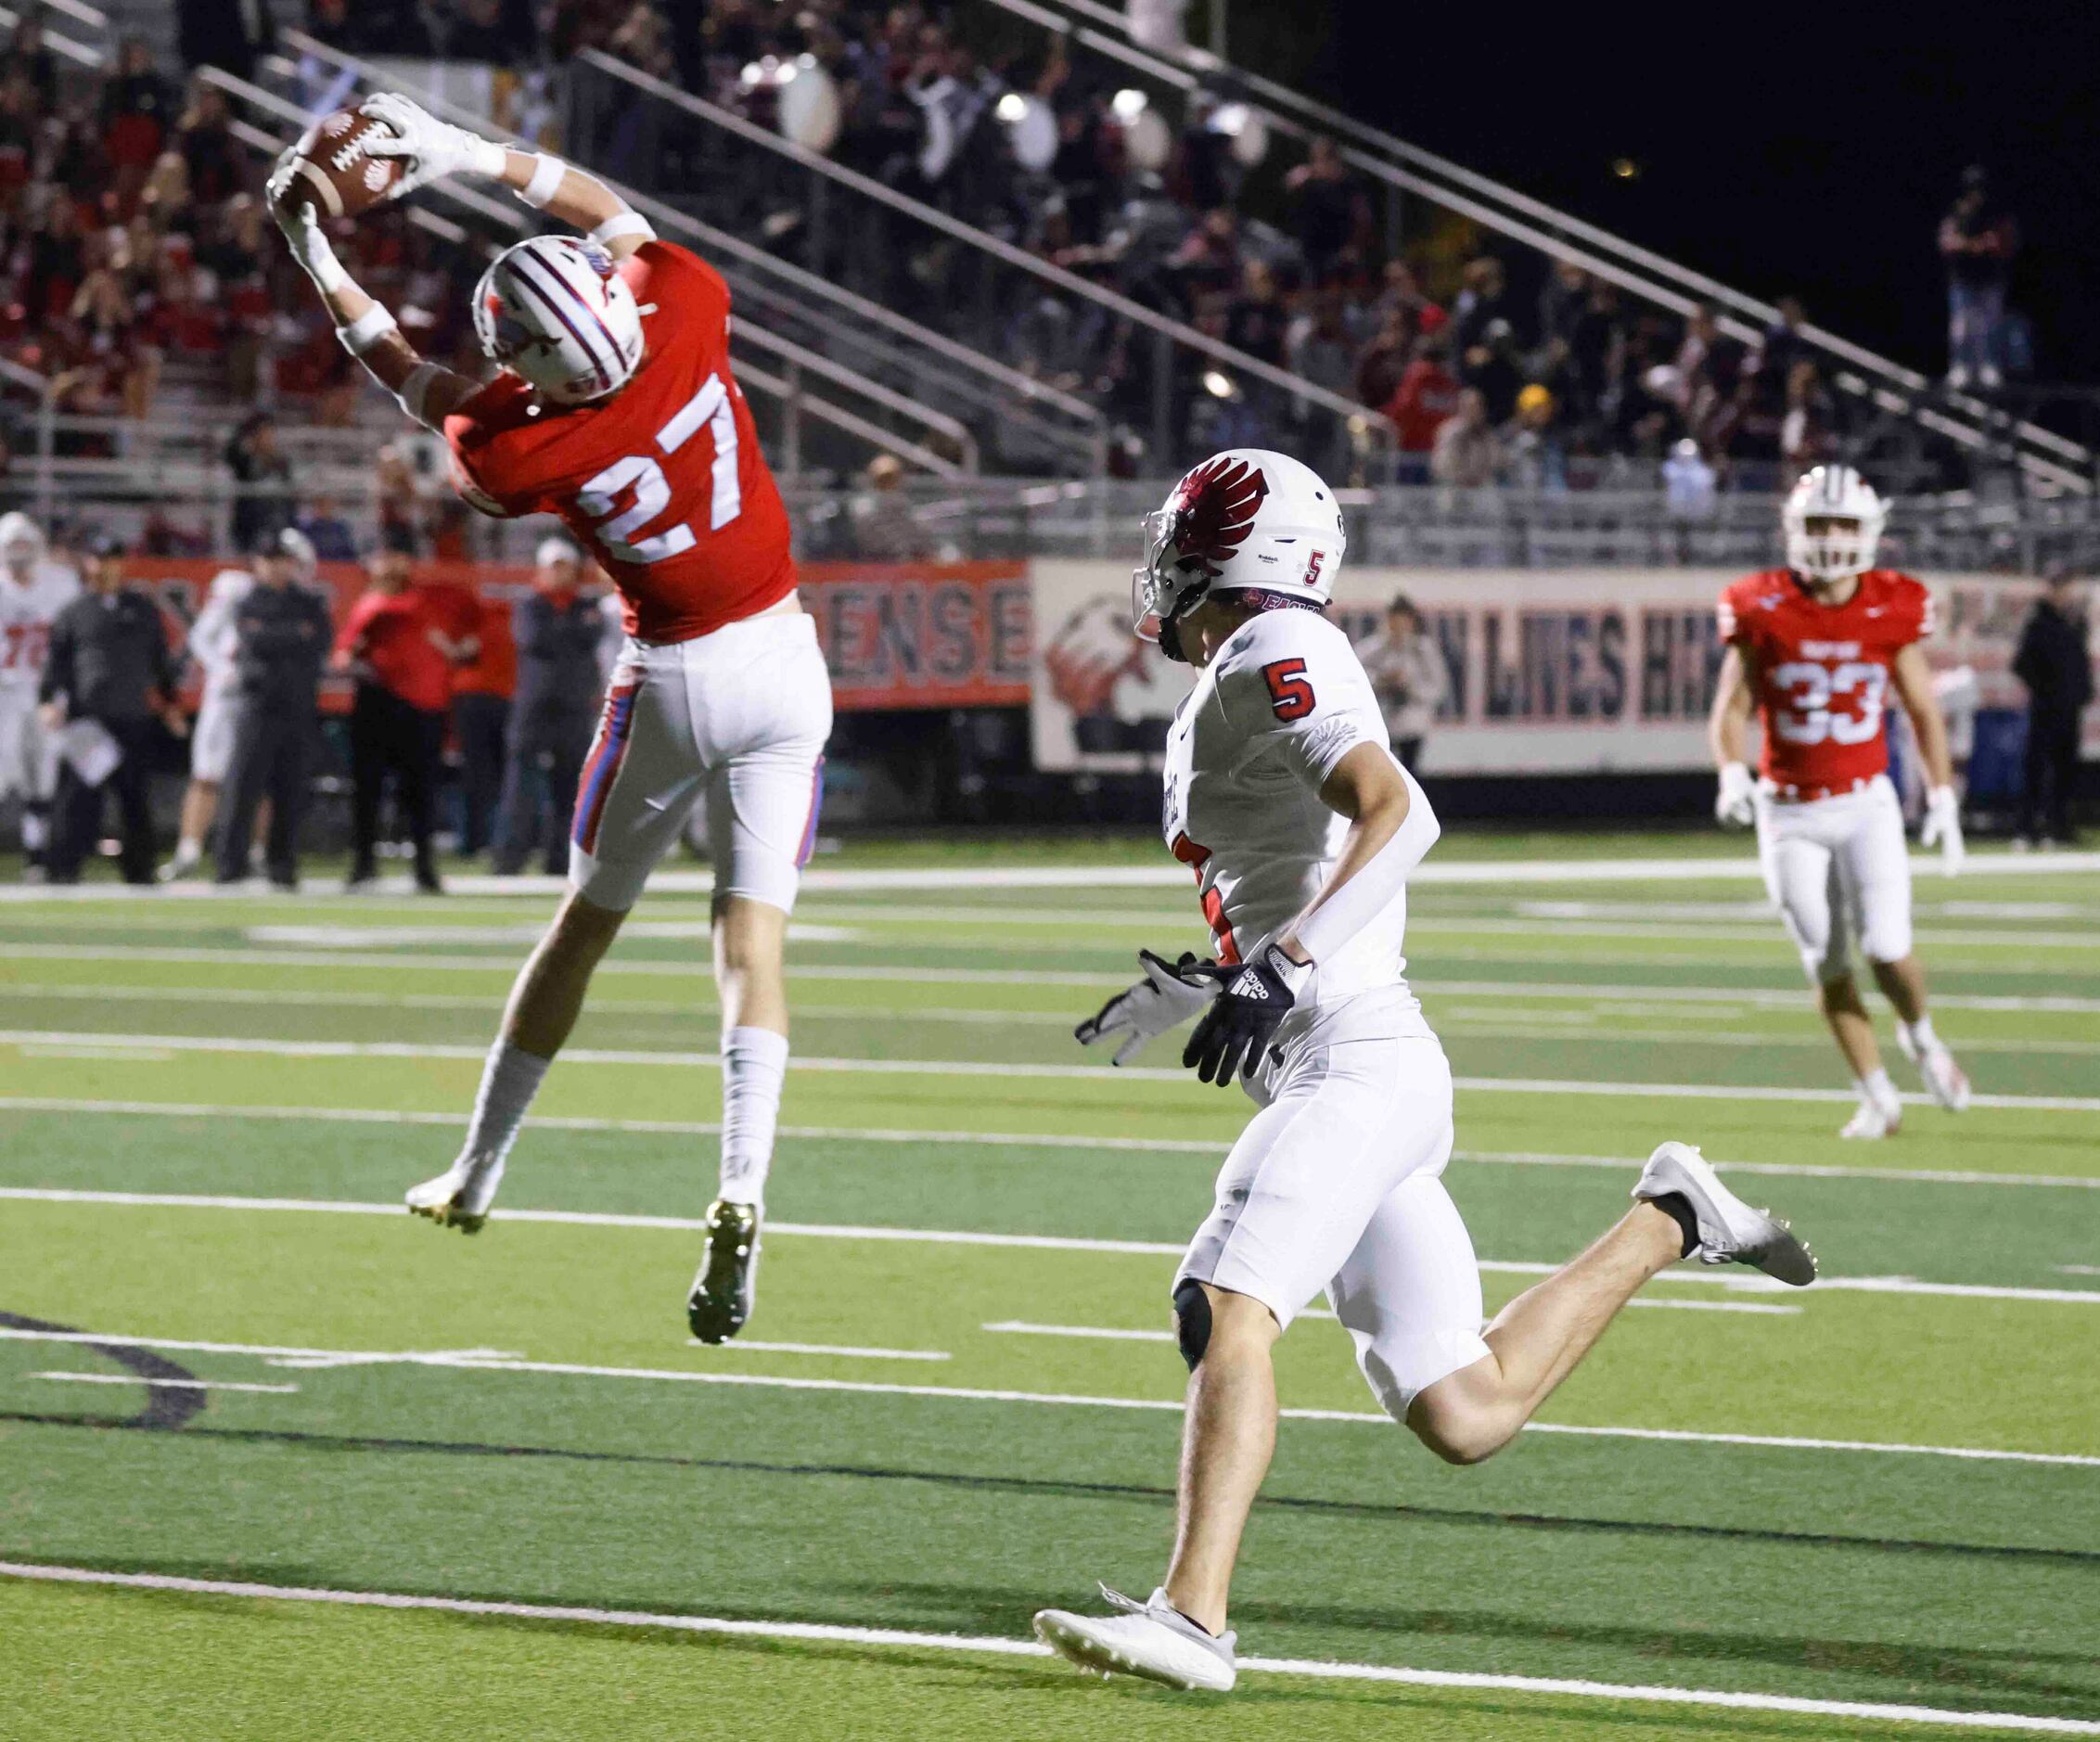 Grapevine High’s Drew Nelson (27), left, intercepts a pass intended for Argyle High’s Will...